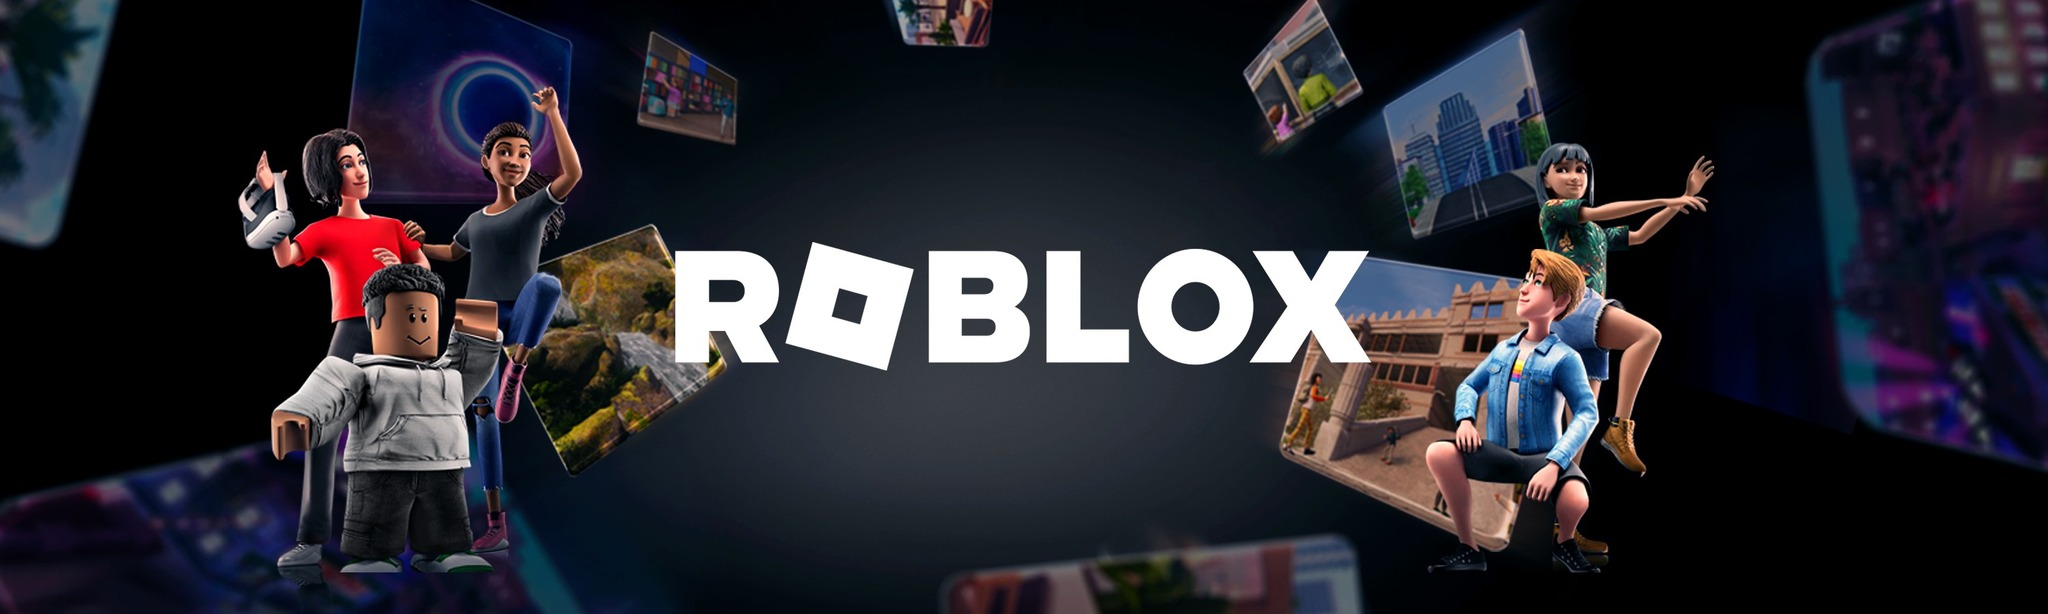 Download Roblox for iOS - Free - 2.605.660